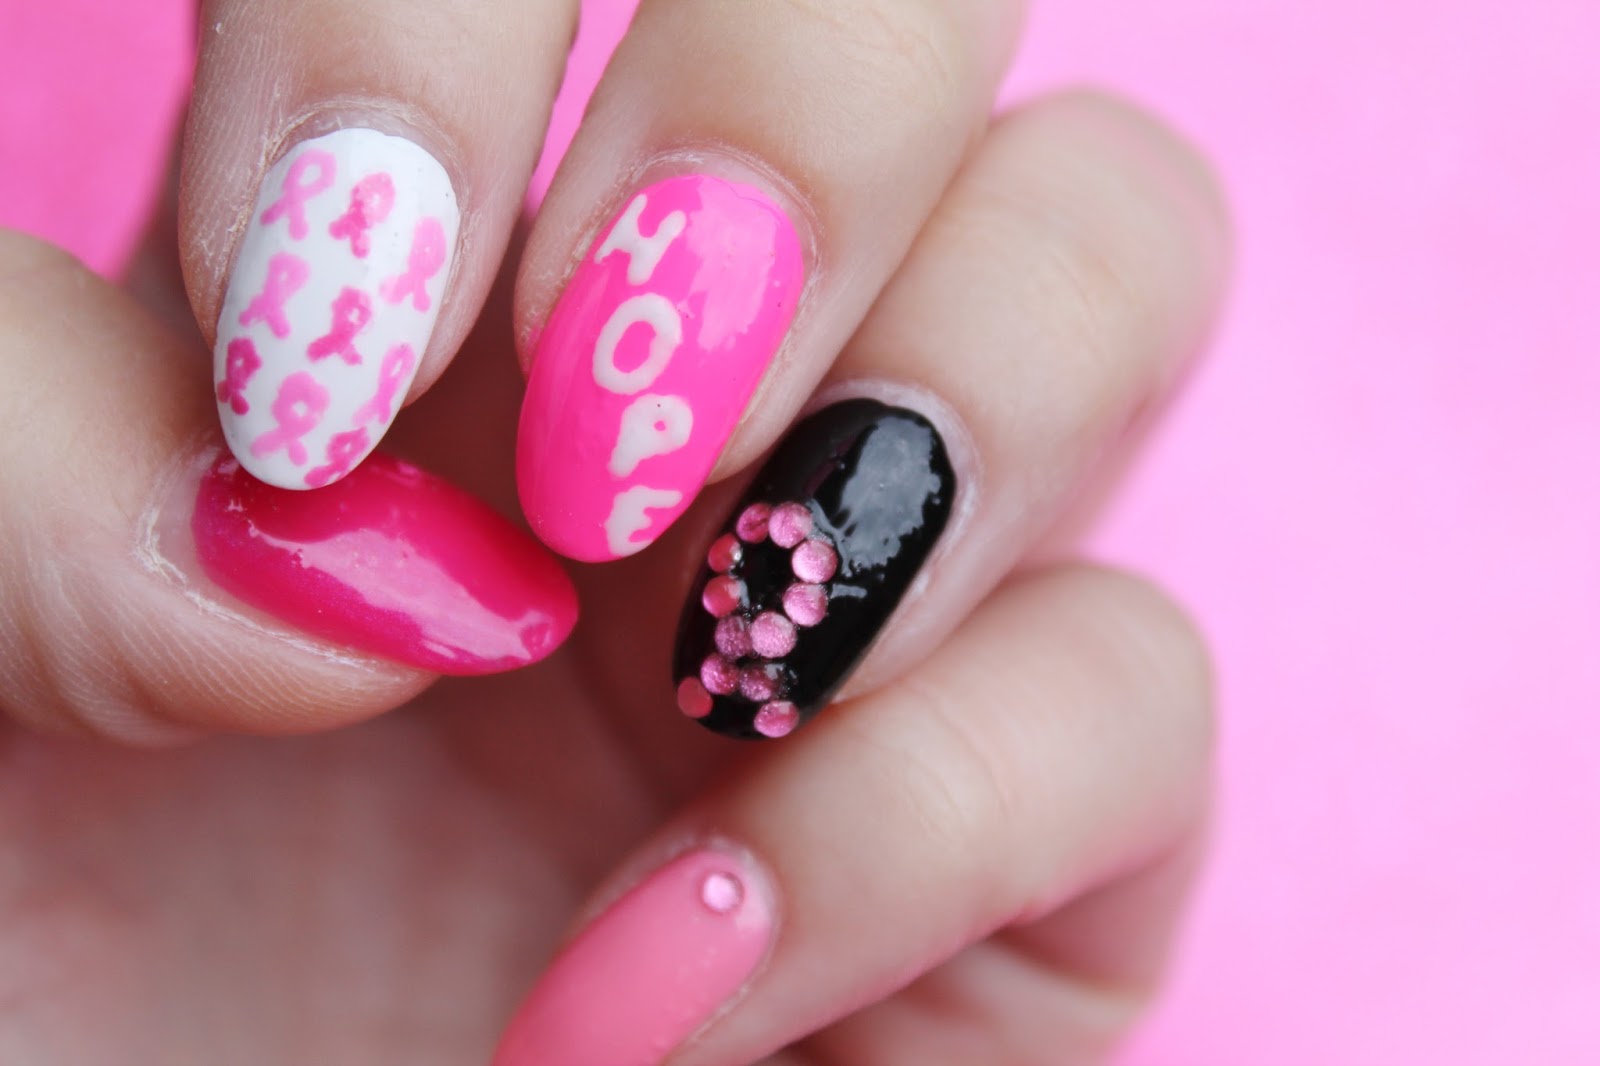 1. Breast Cancer Awareness Nail Art Decals - wide 6